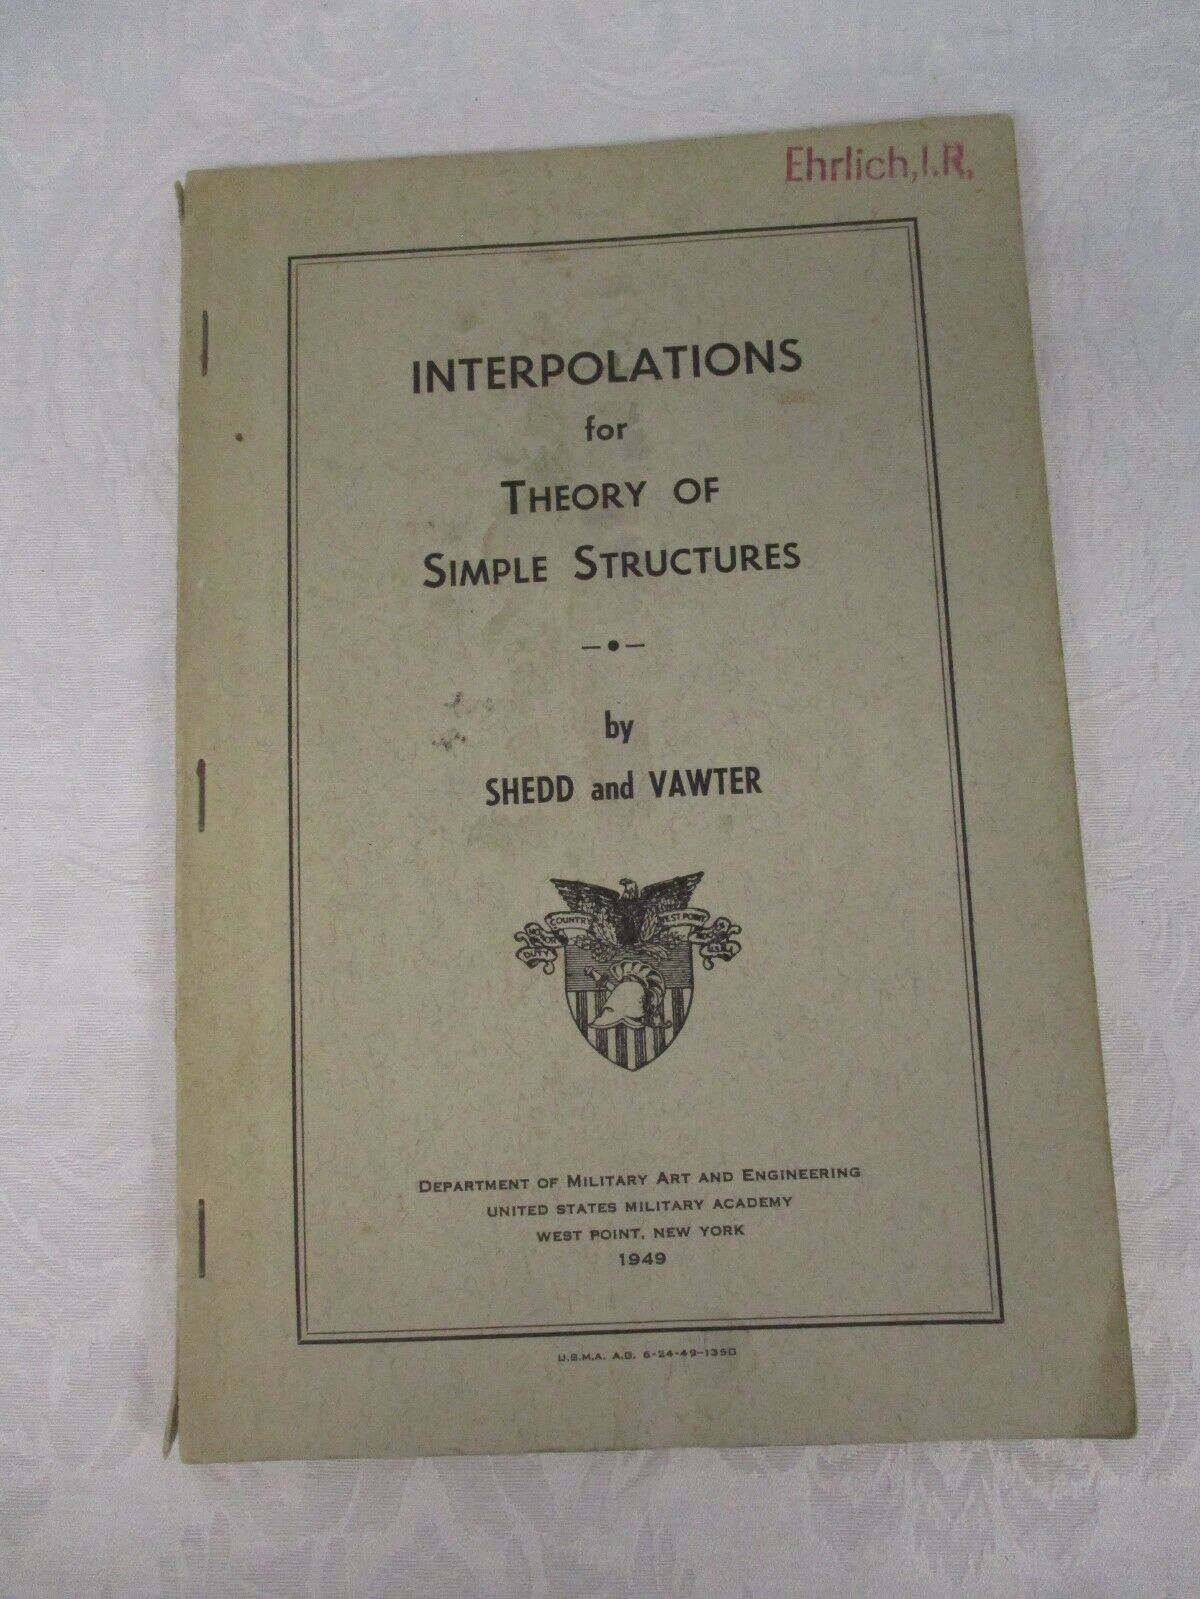 1949 WORLD WAR II MILITARY BOOK INTERPOLATIONS FOR THEORY OF SIMPLE STRUCTURES